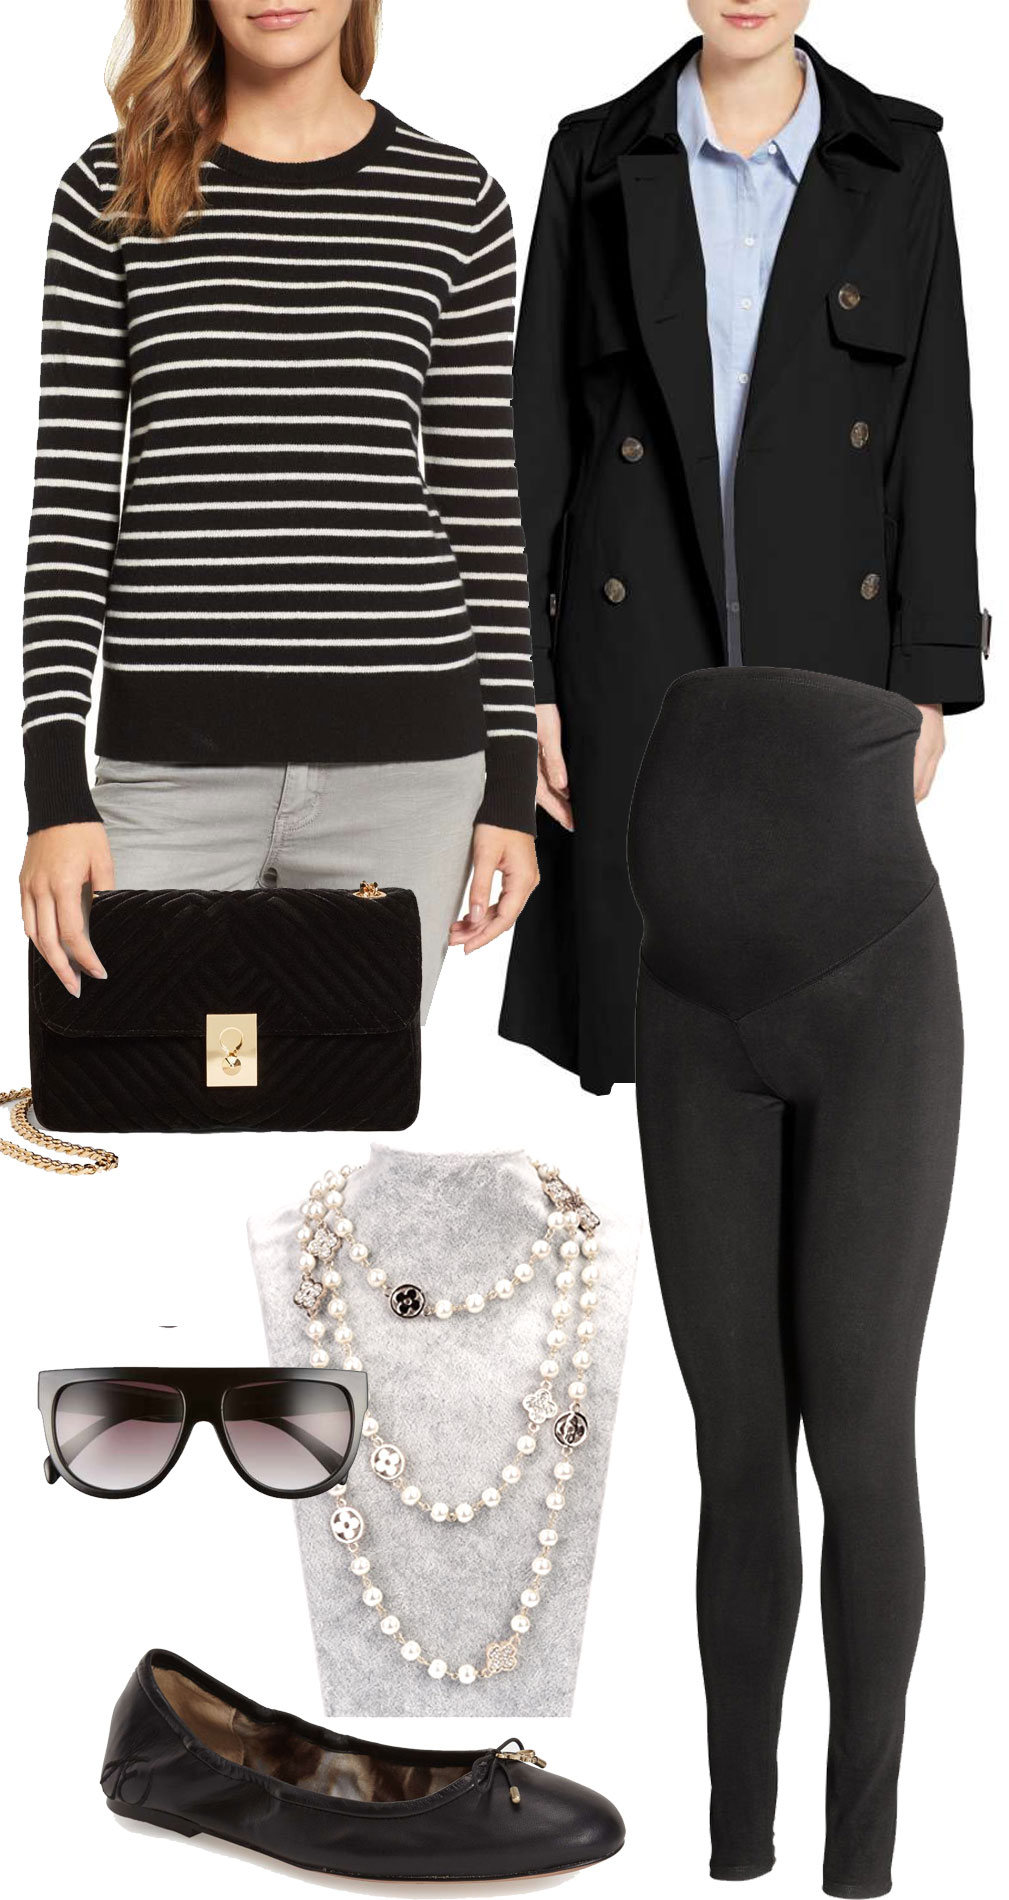 Nicky Hilton's striped sweater and Chanel pearl necklace